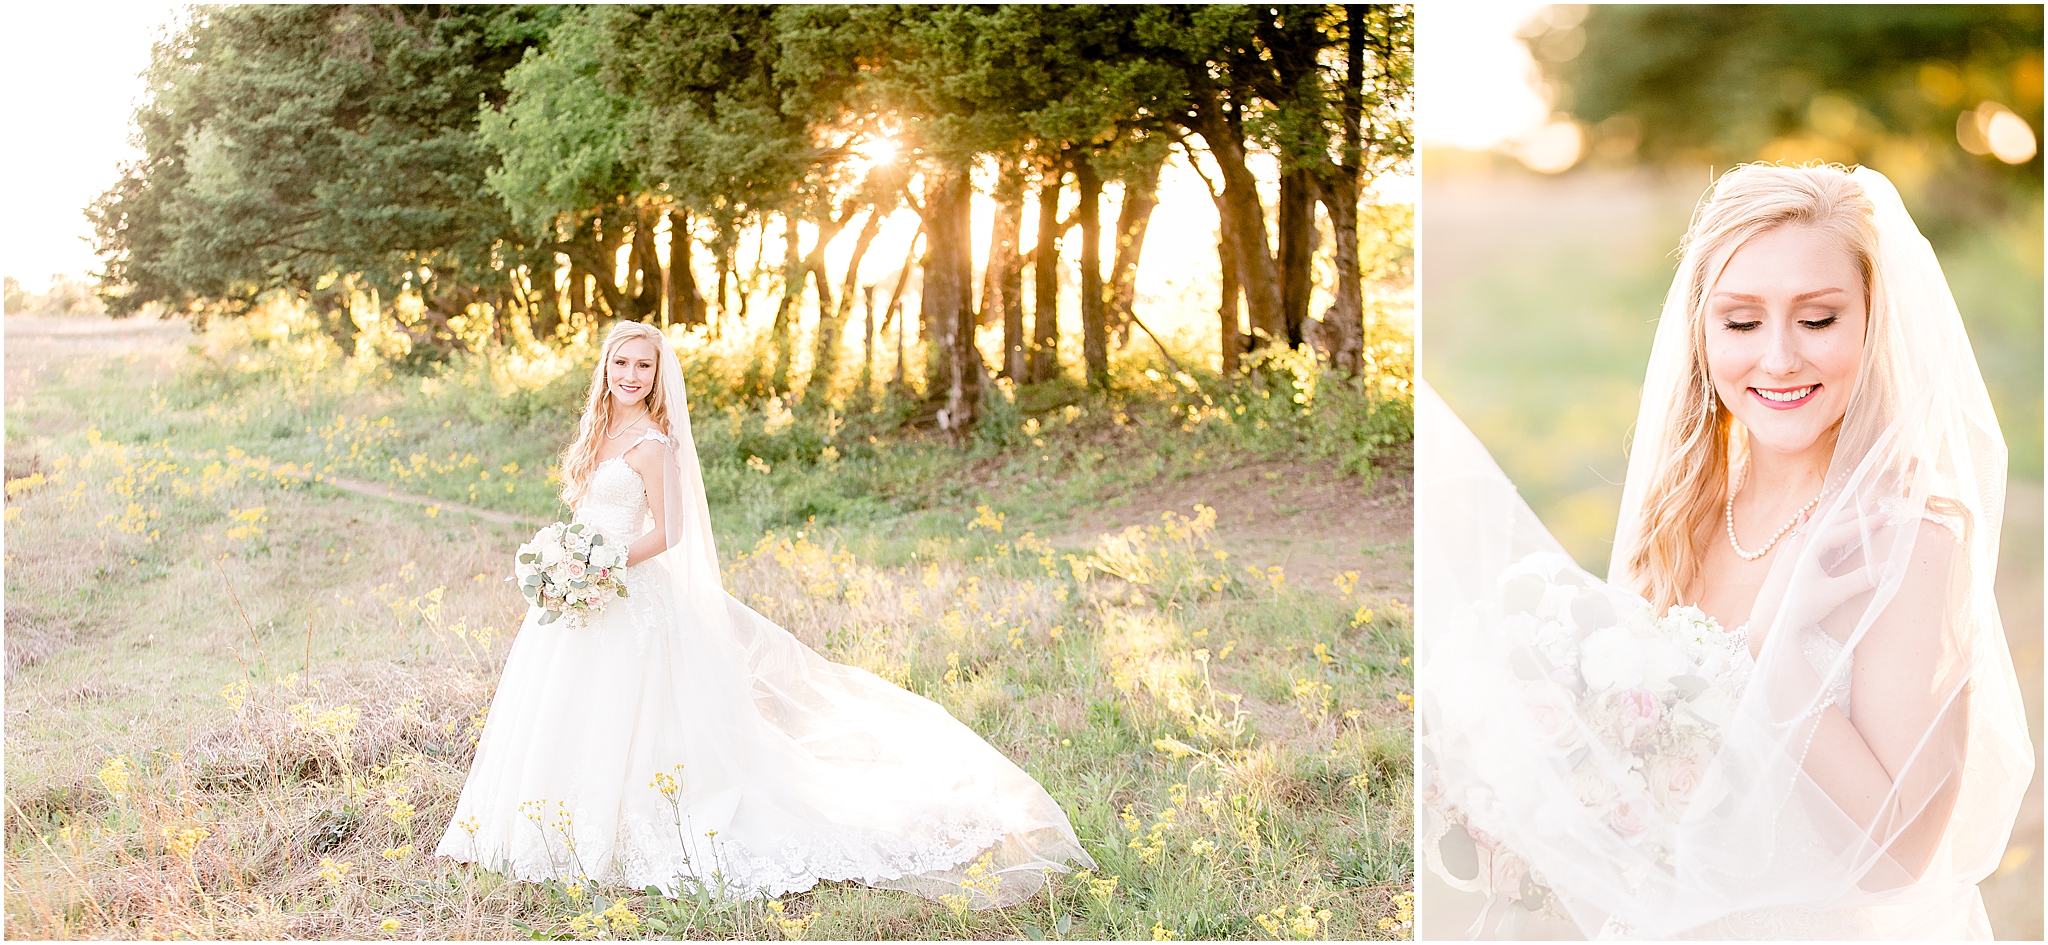 Outdoor Spring Bridal Session by DFW Wedding PHotographer Jillian Hogan based out of McKinney, Texas